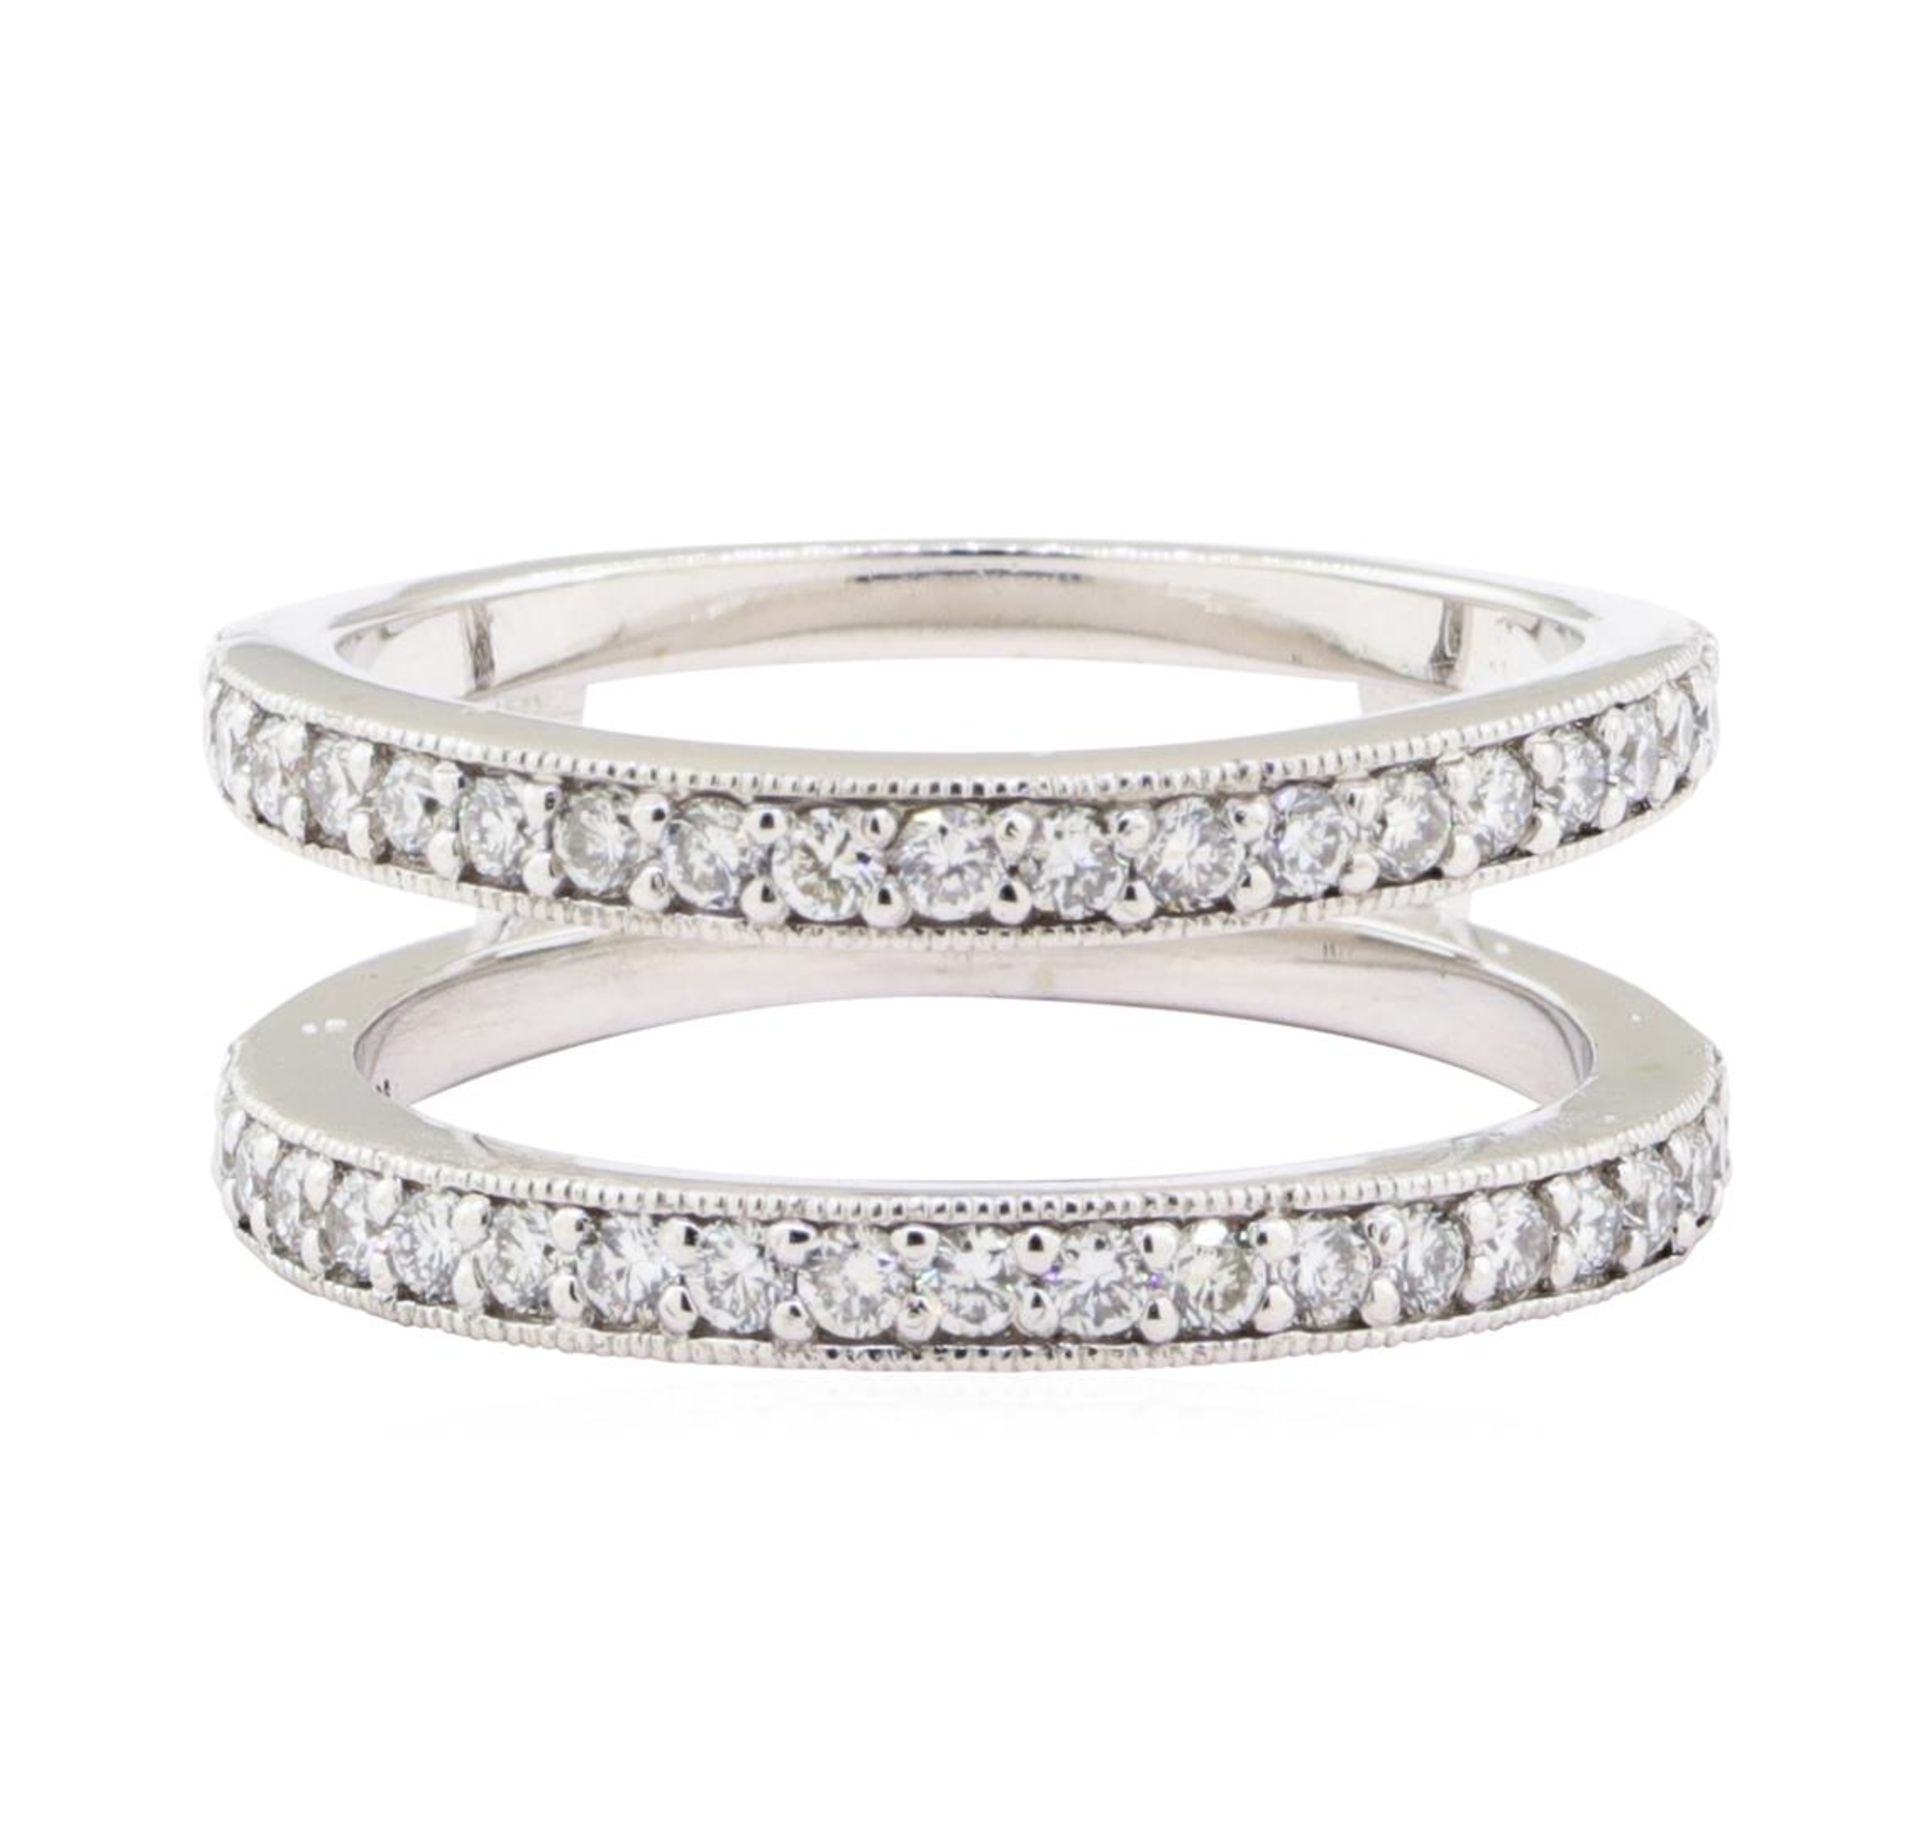 0.60 ctw Diamond Double Row Ring Guard - 14KT White Gold - Image 2 of 4